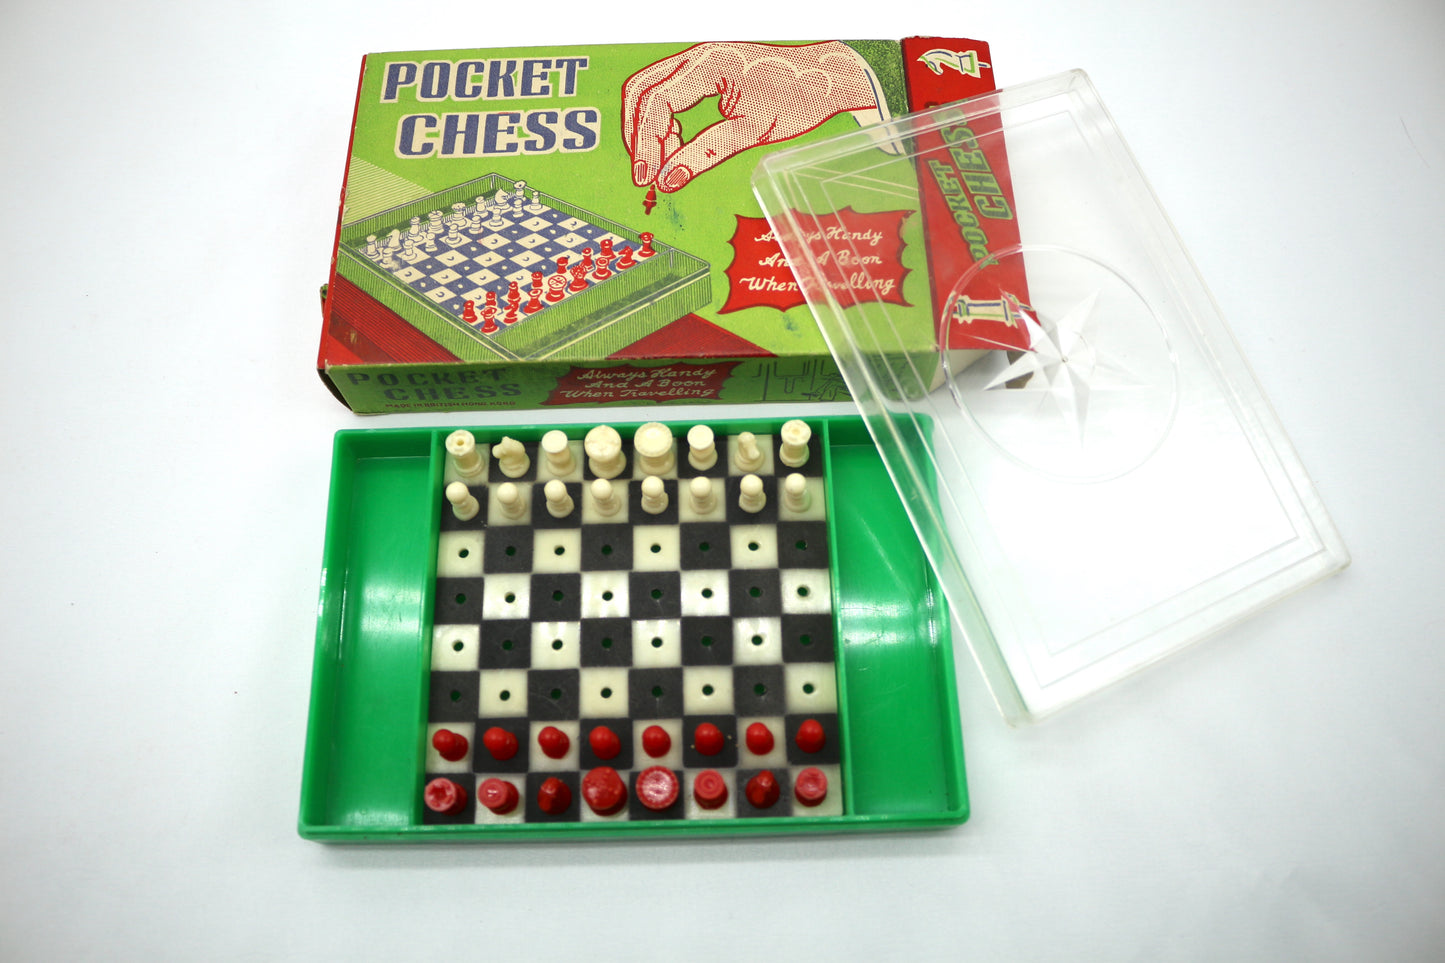 Pocket Chess, Small Games, Car Games, Collectable Chess Game